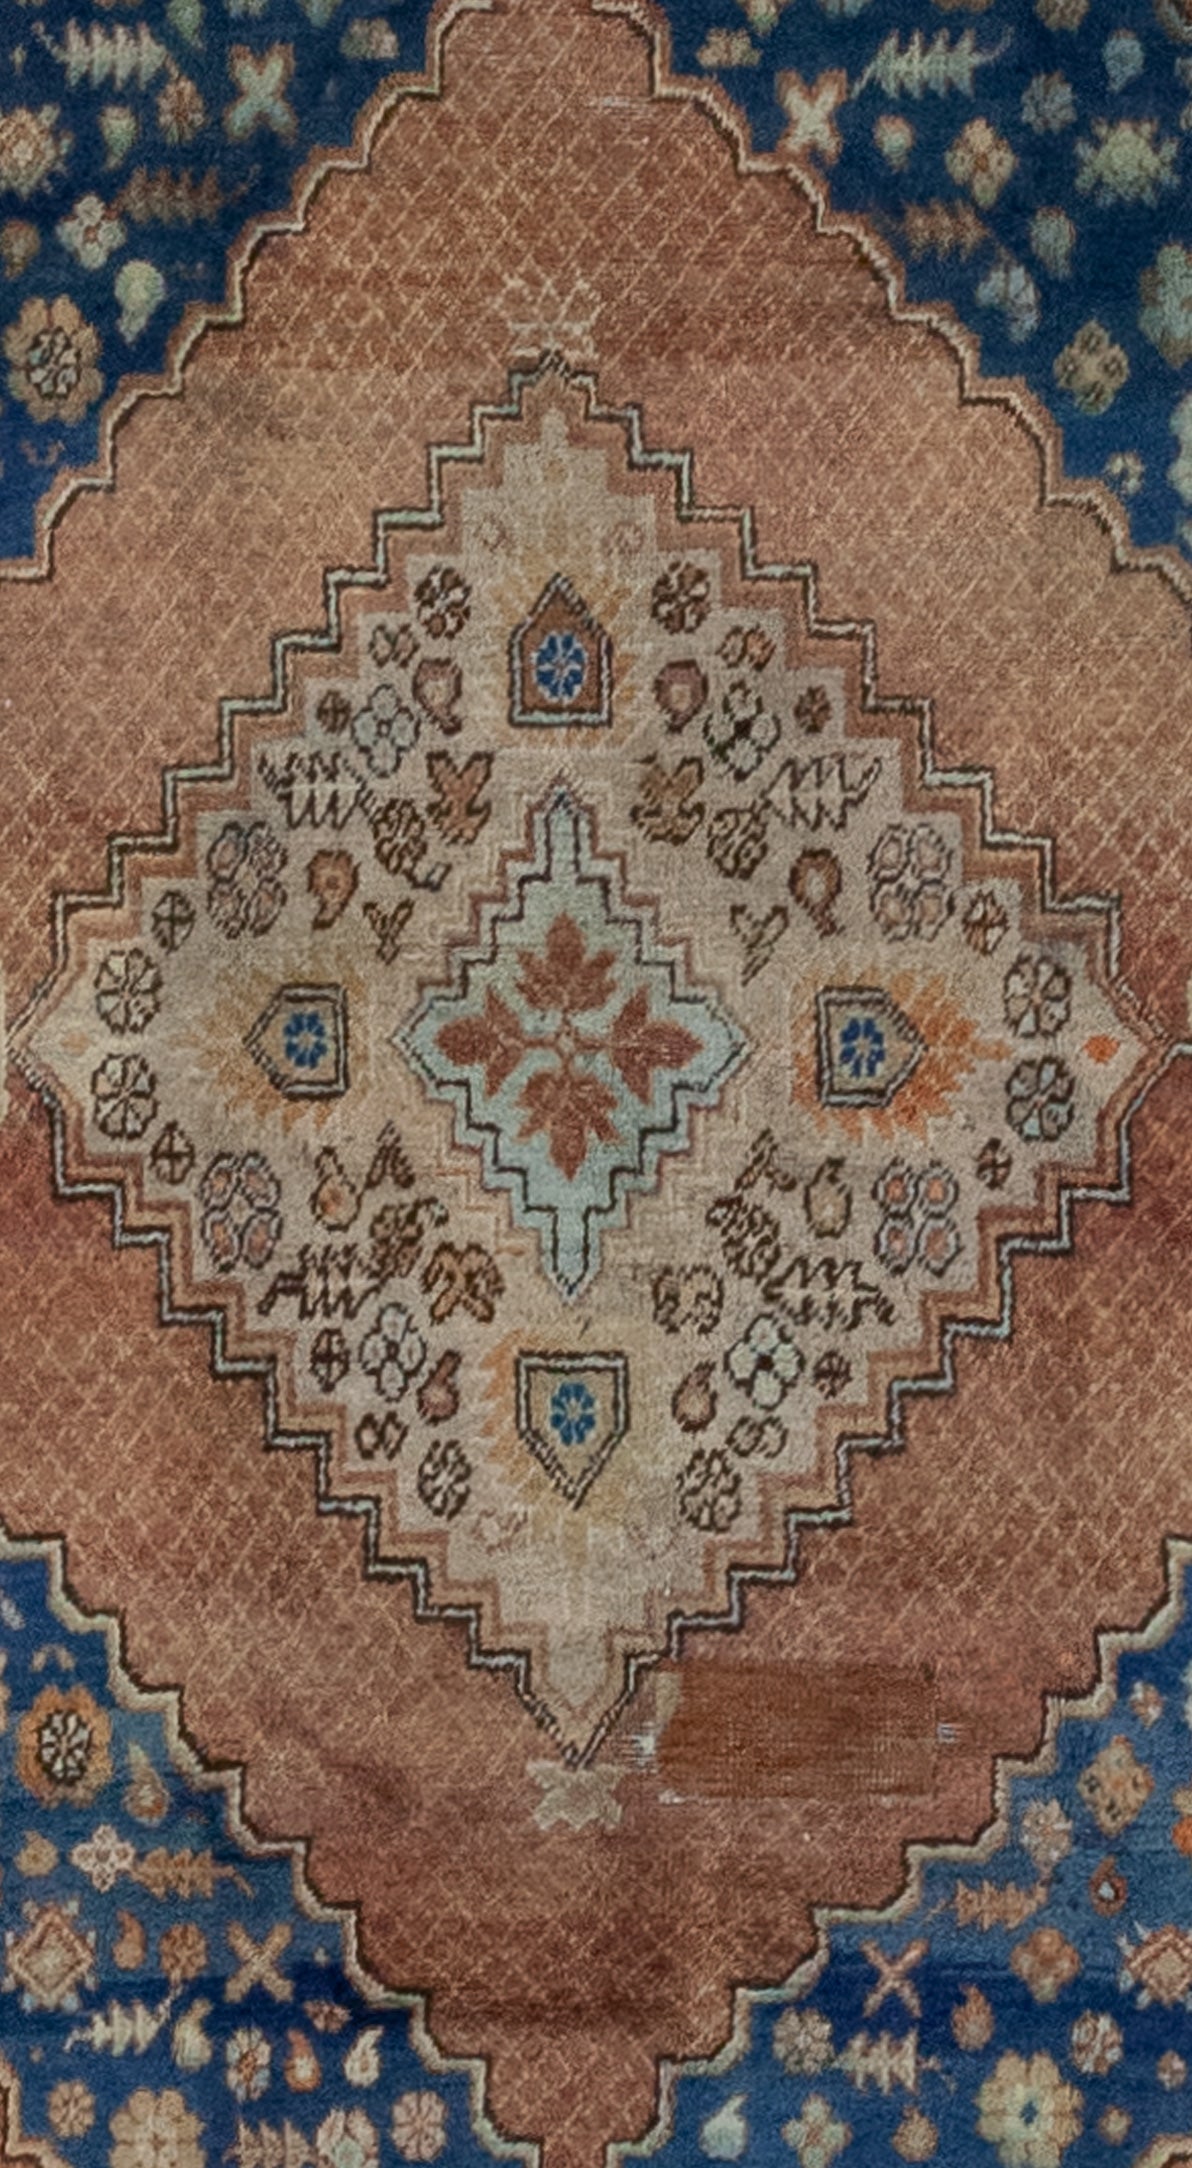 The center of the carpet displays a closer look of the nested diamonds and their pattern which are abstract small flowers and leaves organized symmetrically. 